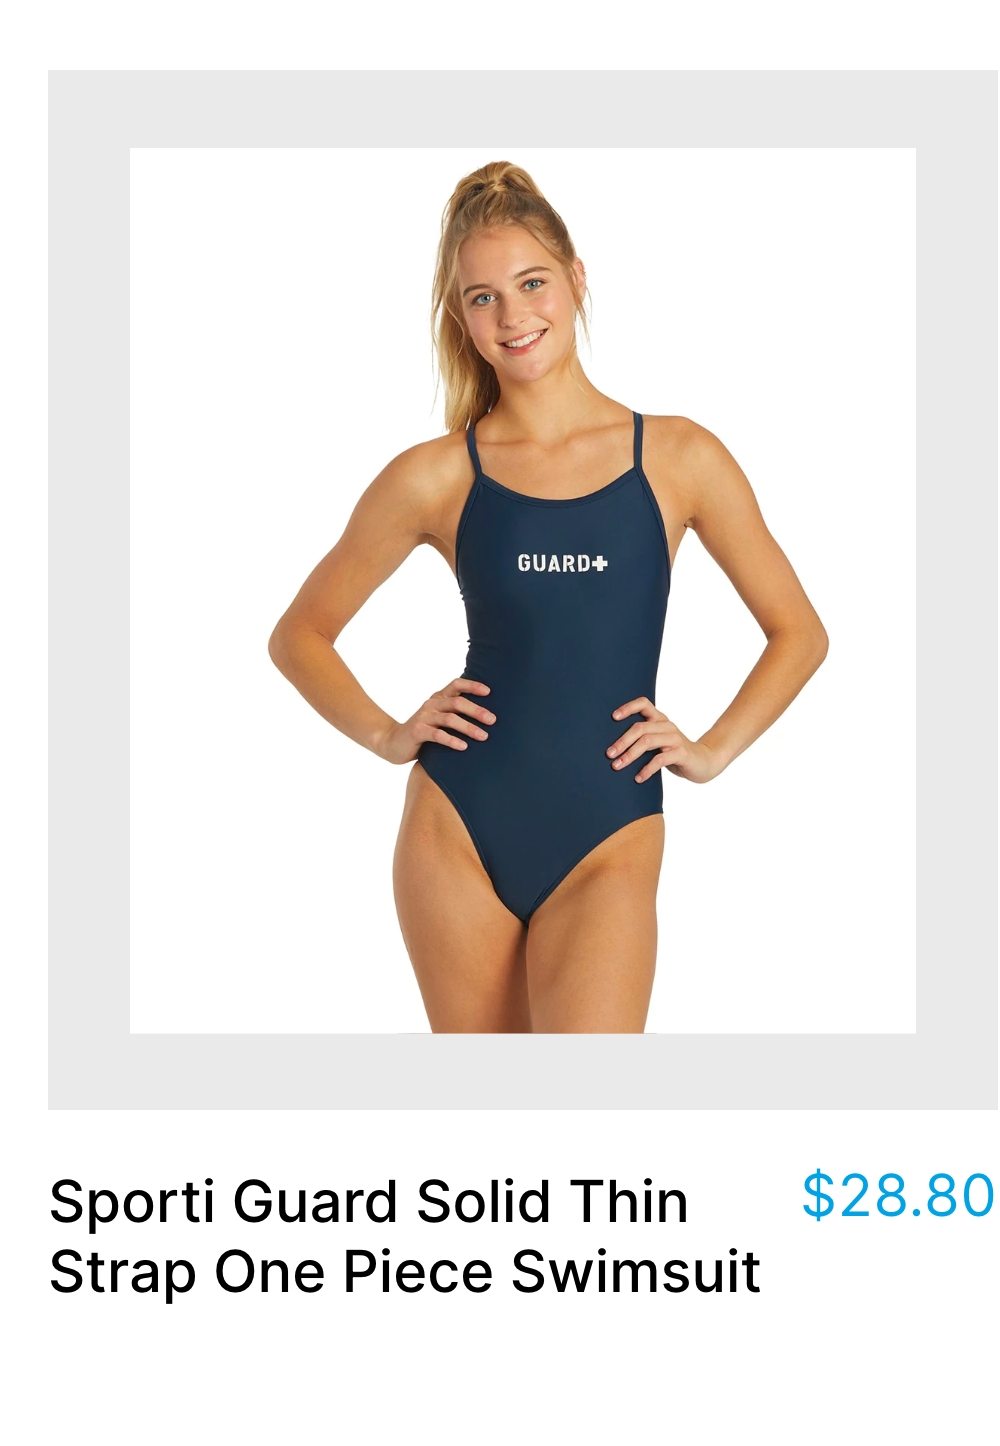 Sporti Guard Solid Thin Strap One Piece Swimsuit at